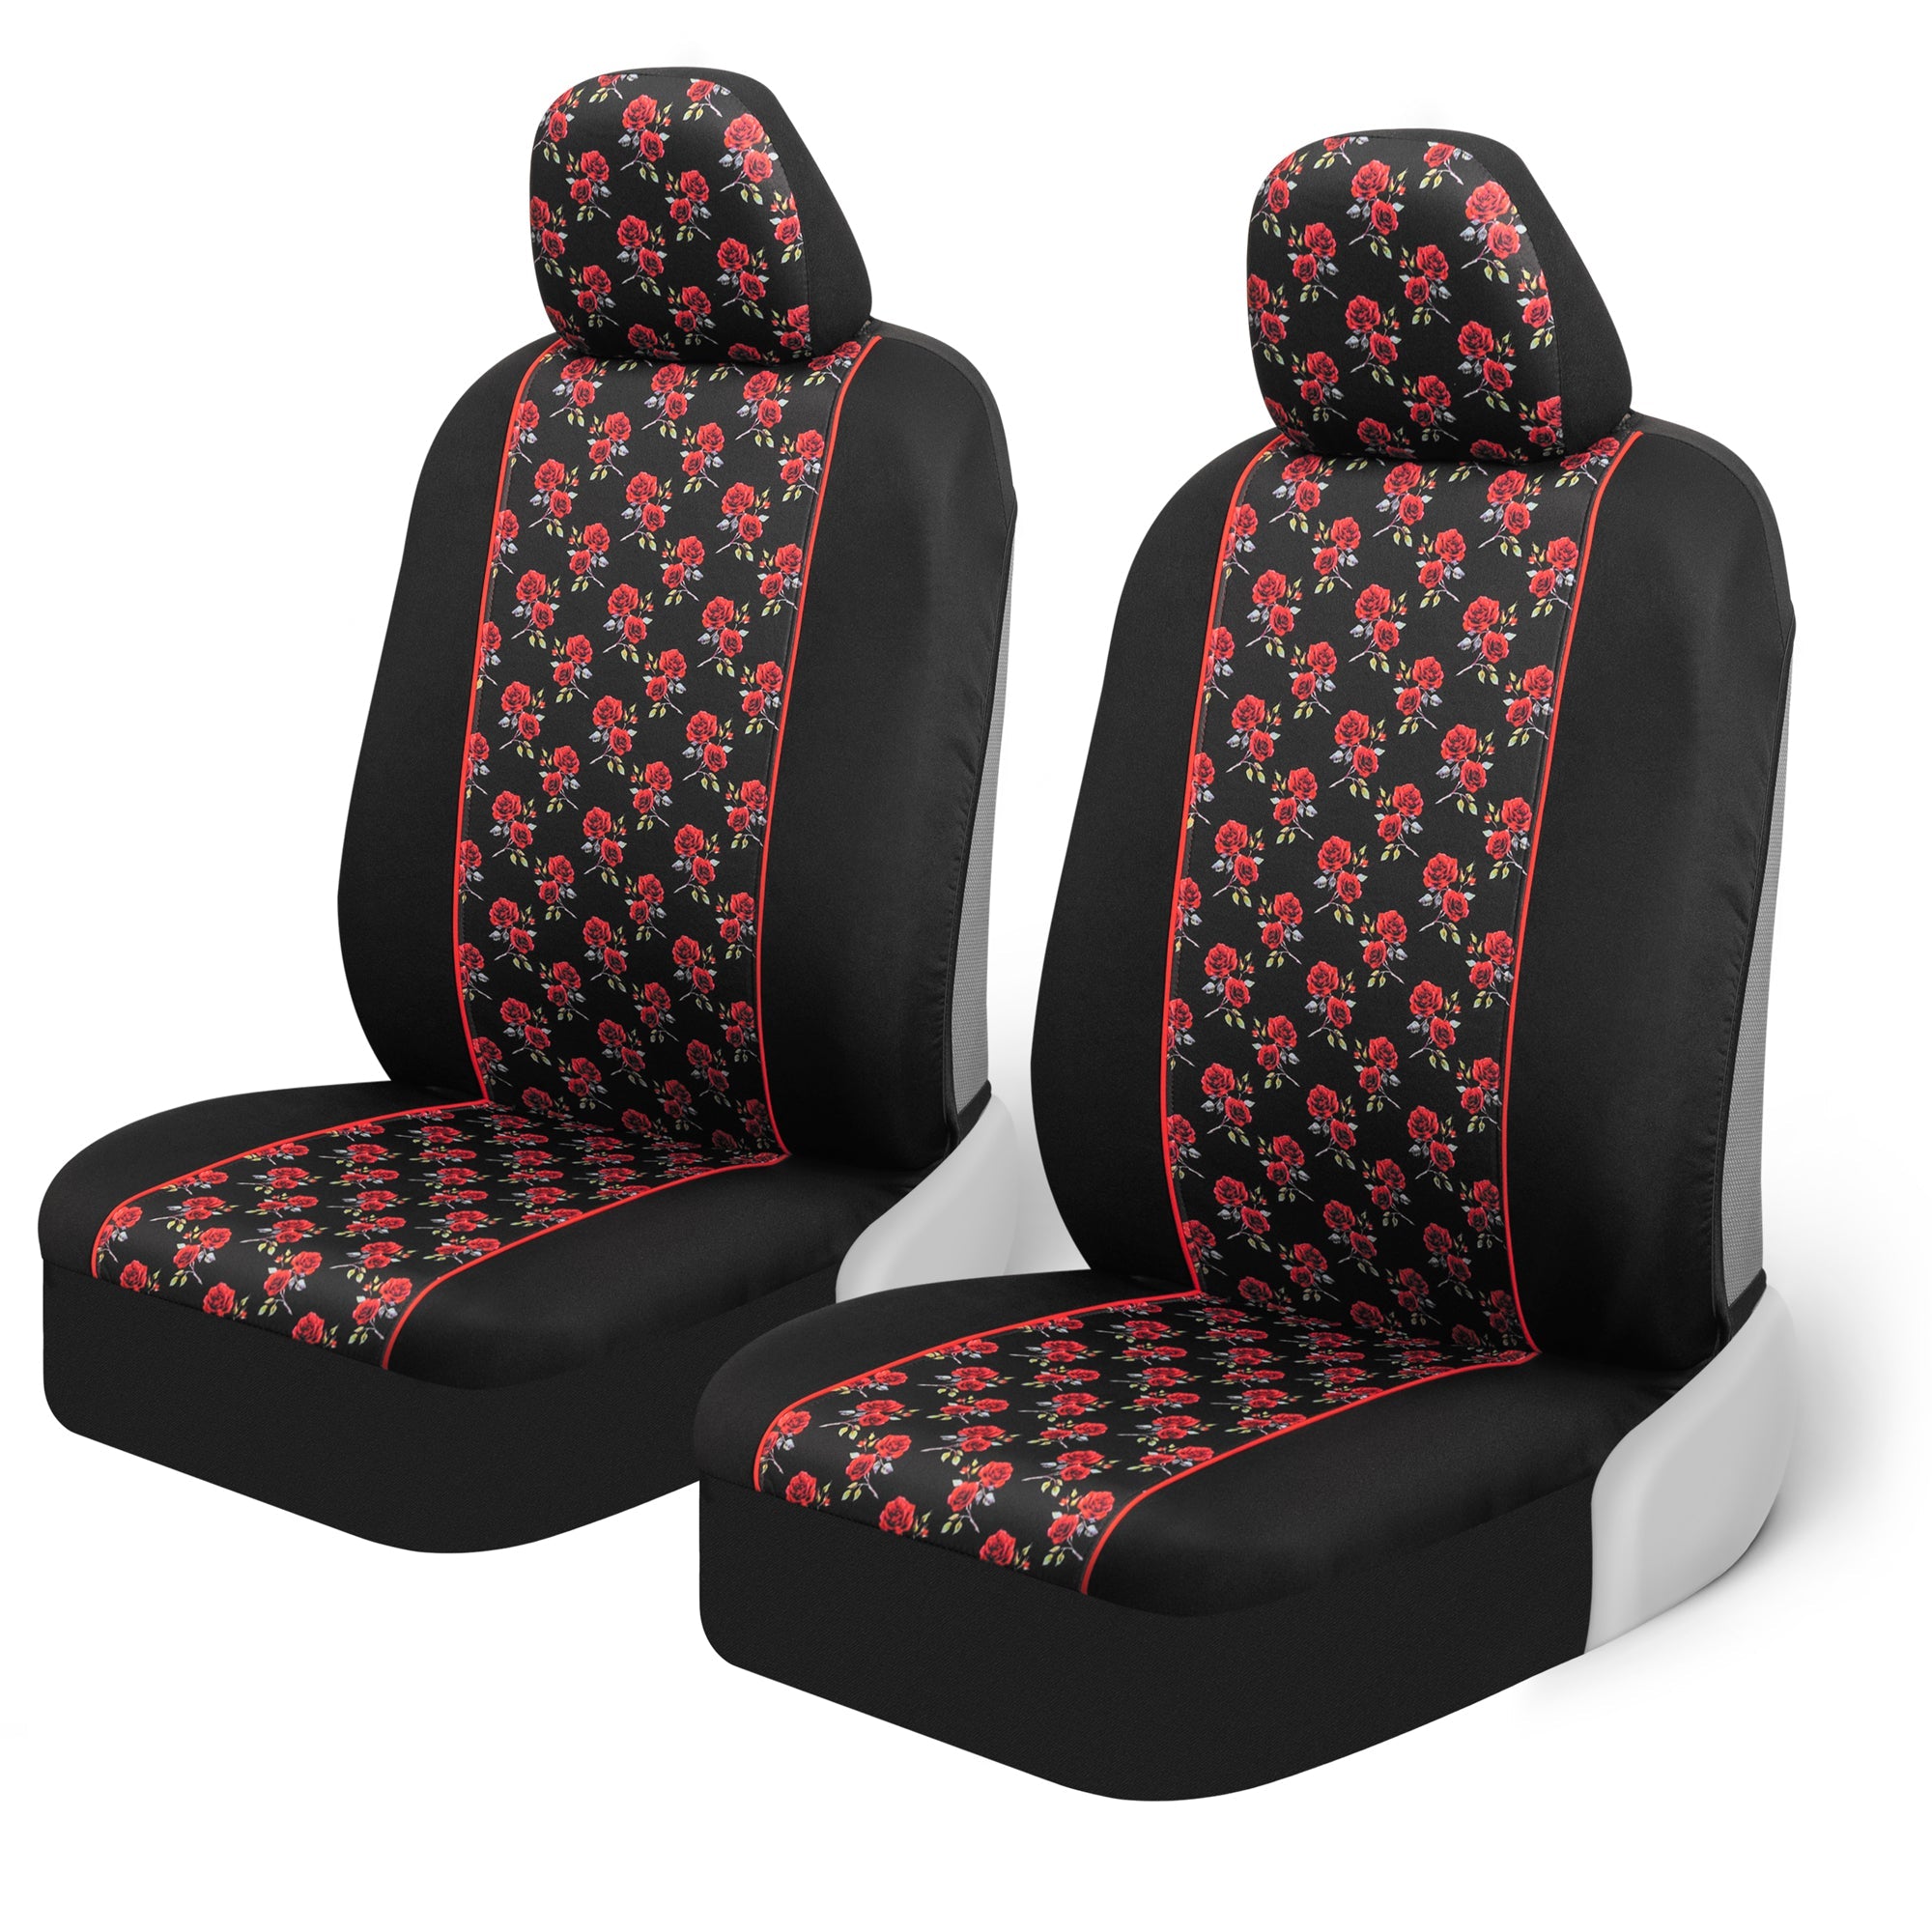 BDK Red Rose Car Seat Covers for Front Seats, 2 Pack – Flower Pattern Front Seat Cover Set with Matching Headrest, Sideless Design for Easy Installation, Fits Most Car Truck Van and SUV